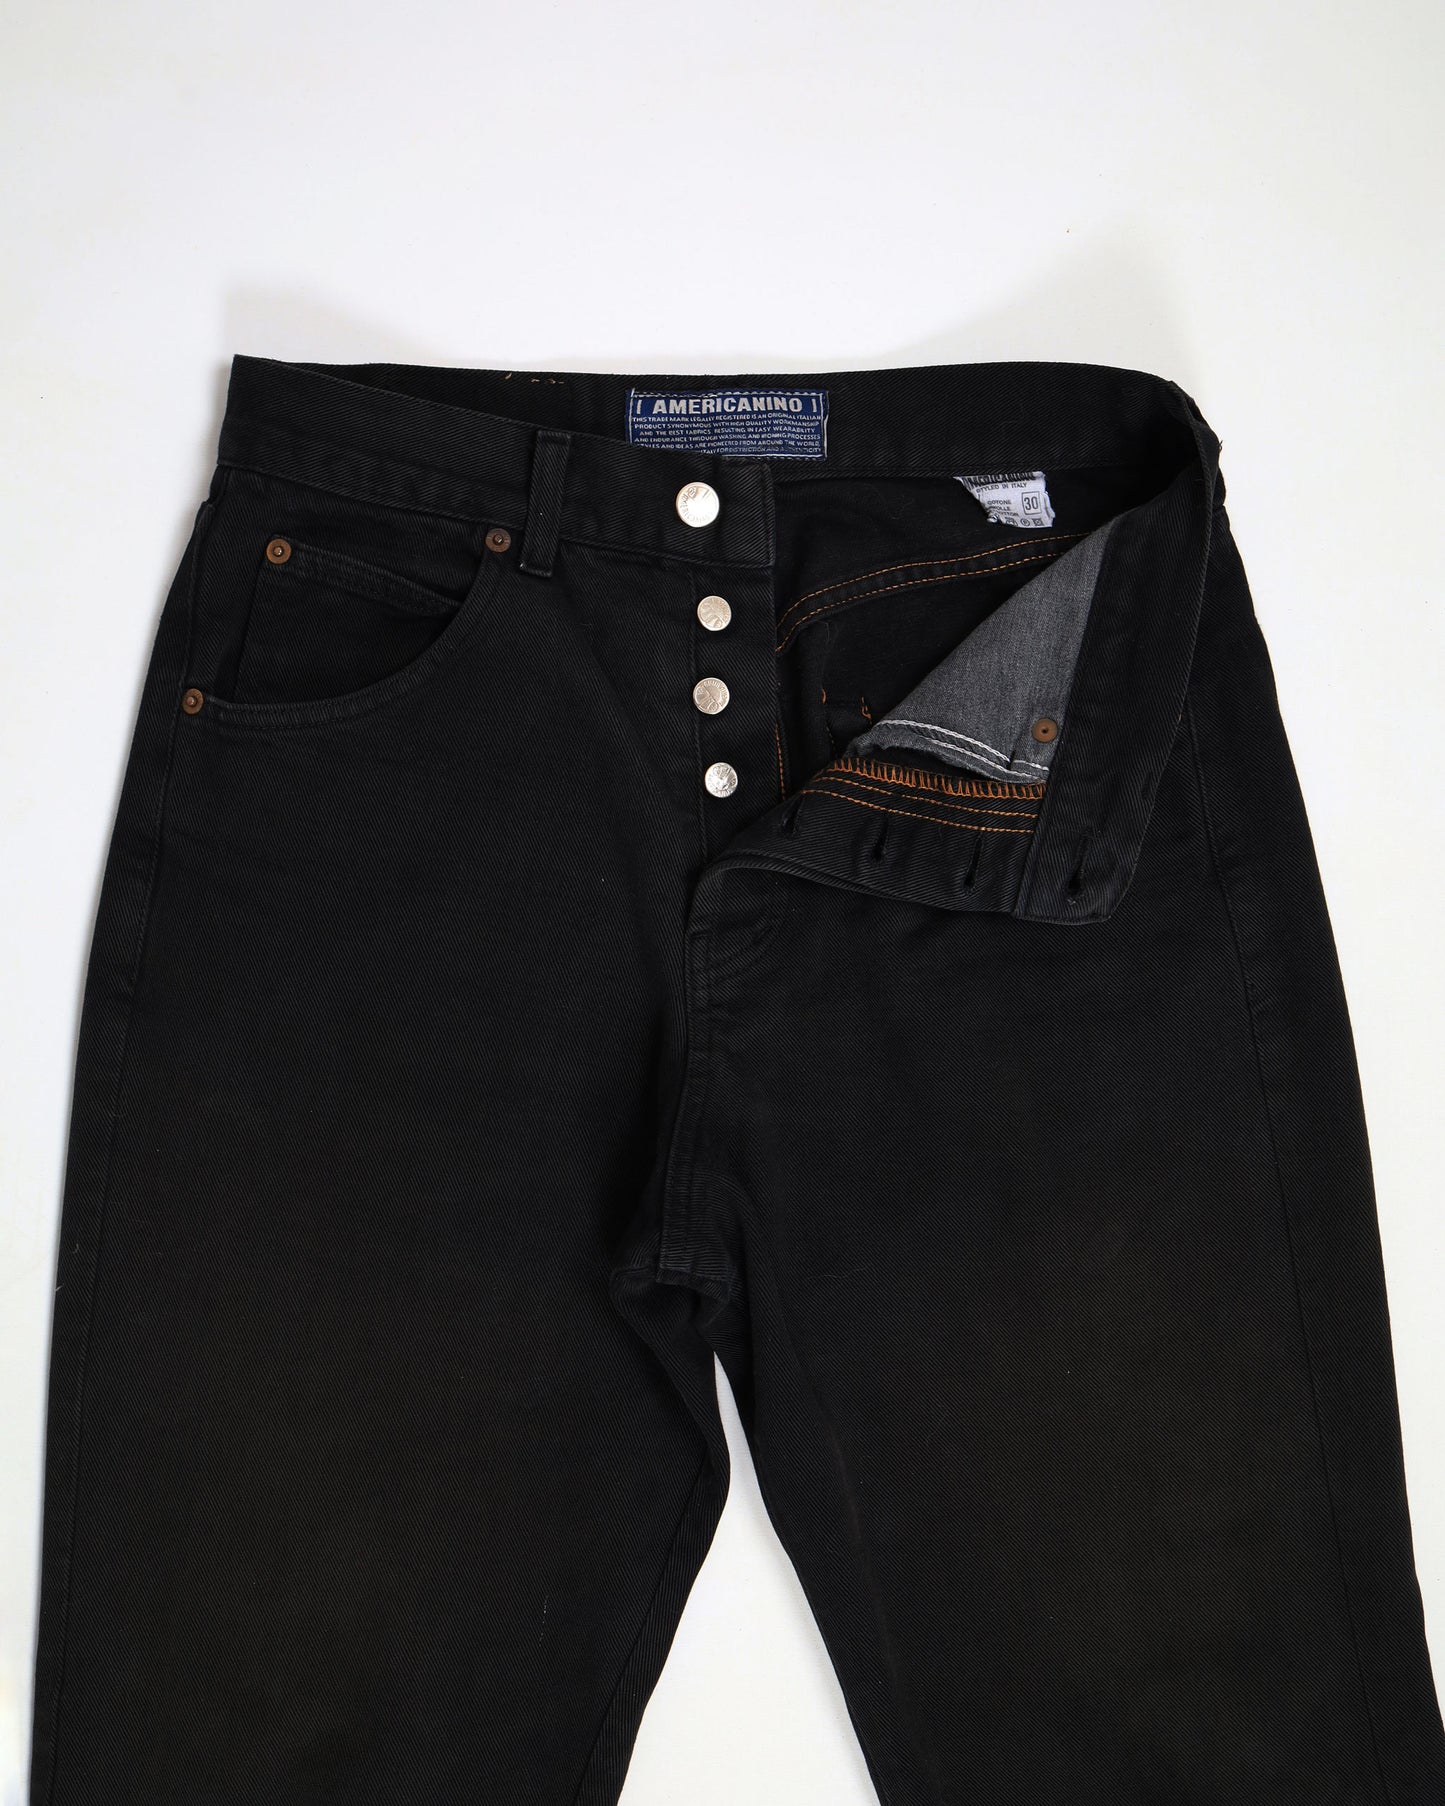 Americanino Reworked Tapered Fit Denim Jeans